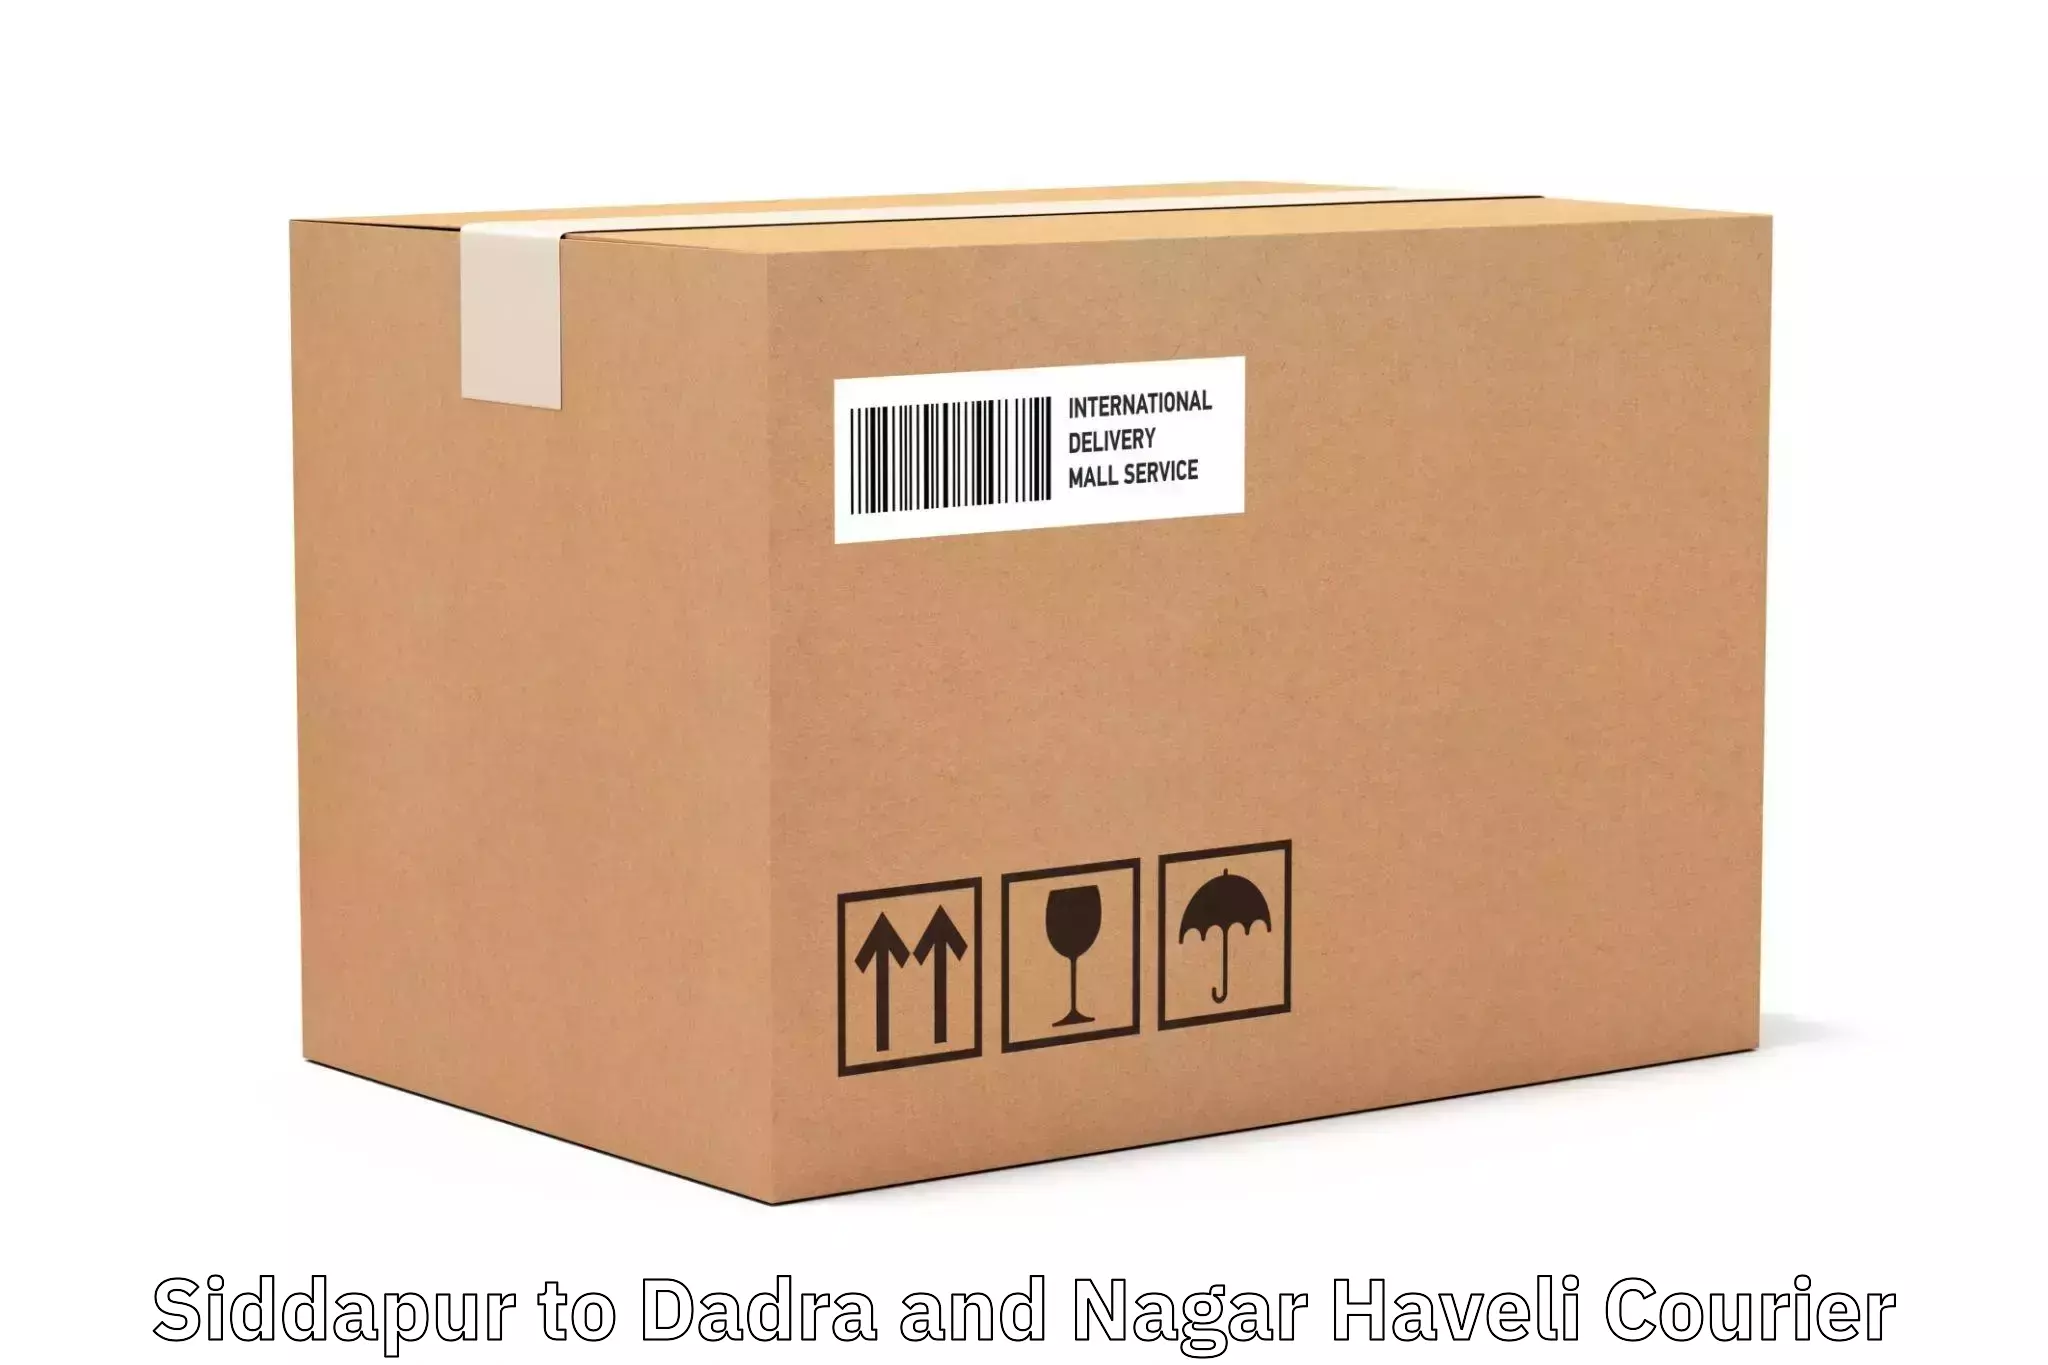 Tailored shipping services in Siddapur to Silvassa